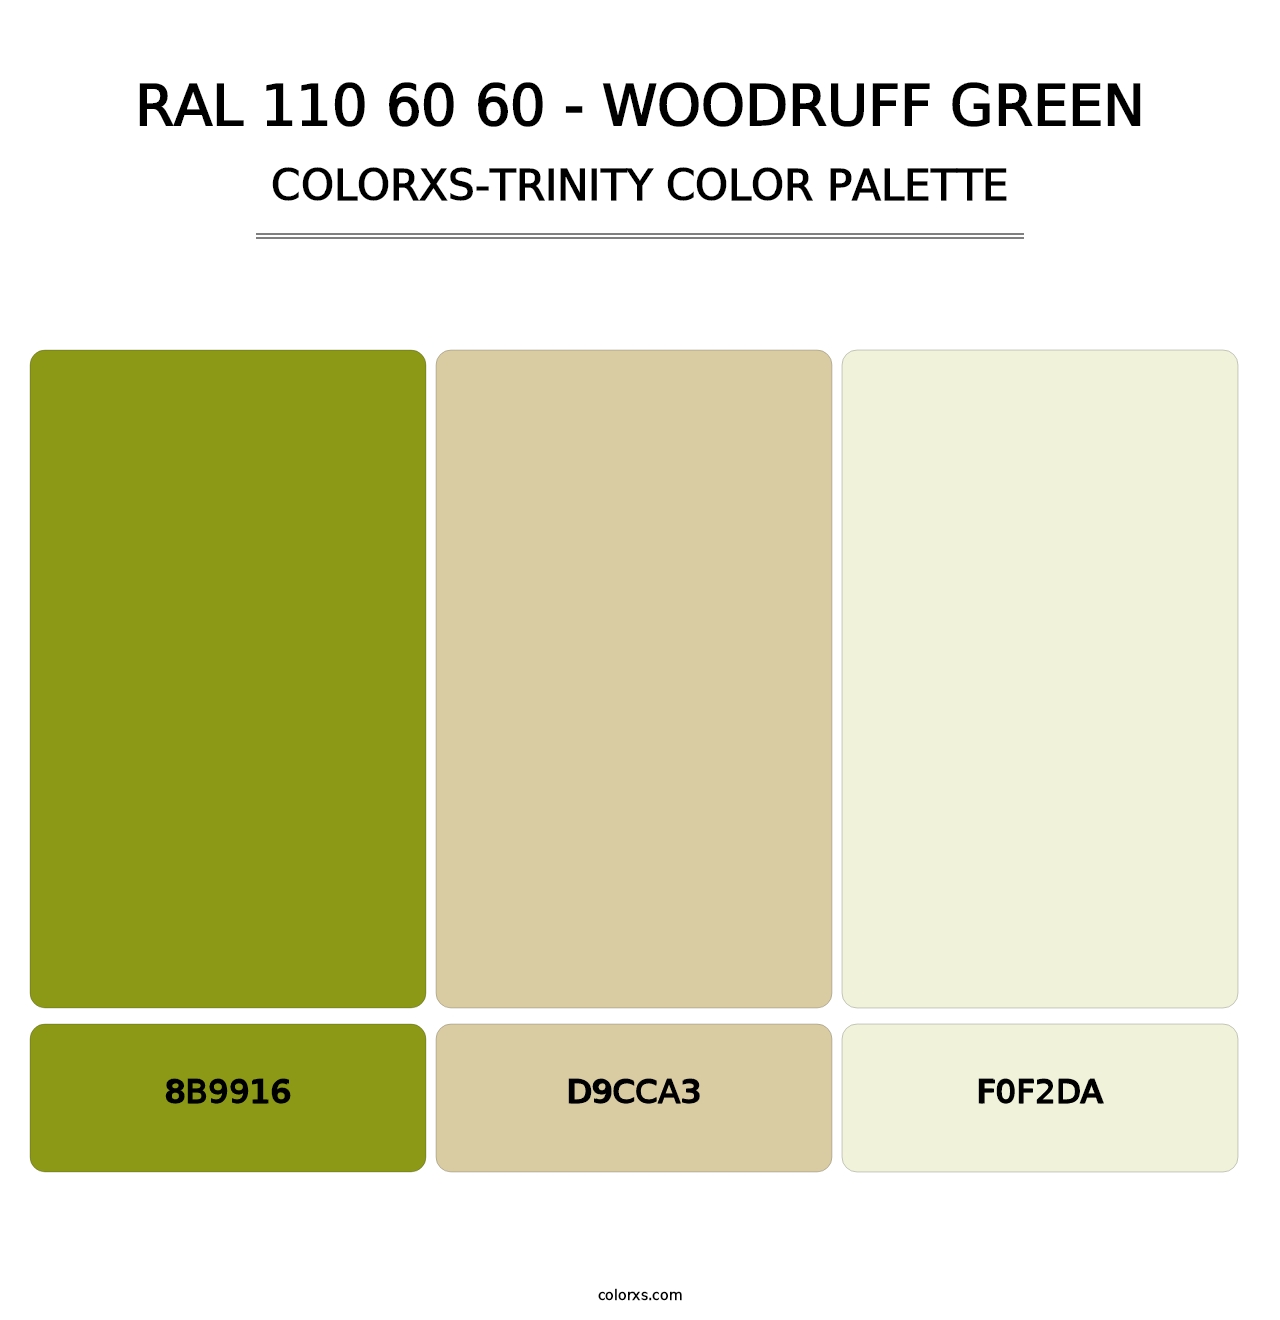 RAL 110 60 60 - Woodruff Green - Colorxs Trinity Palette